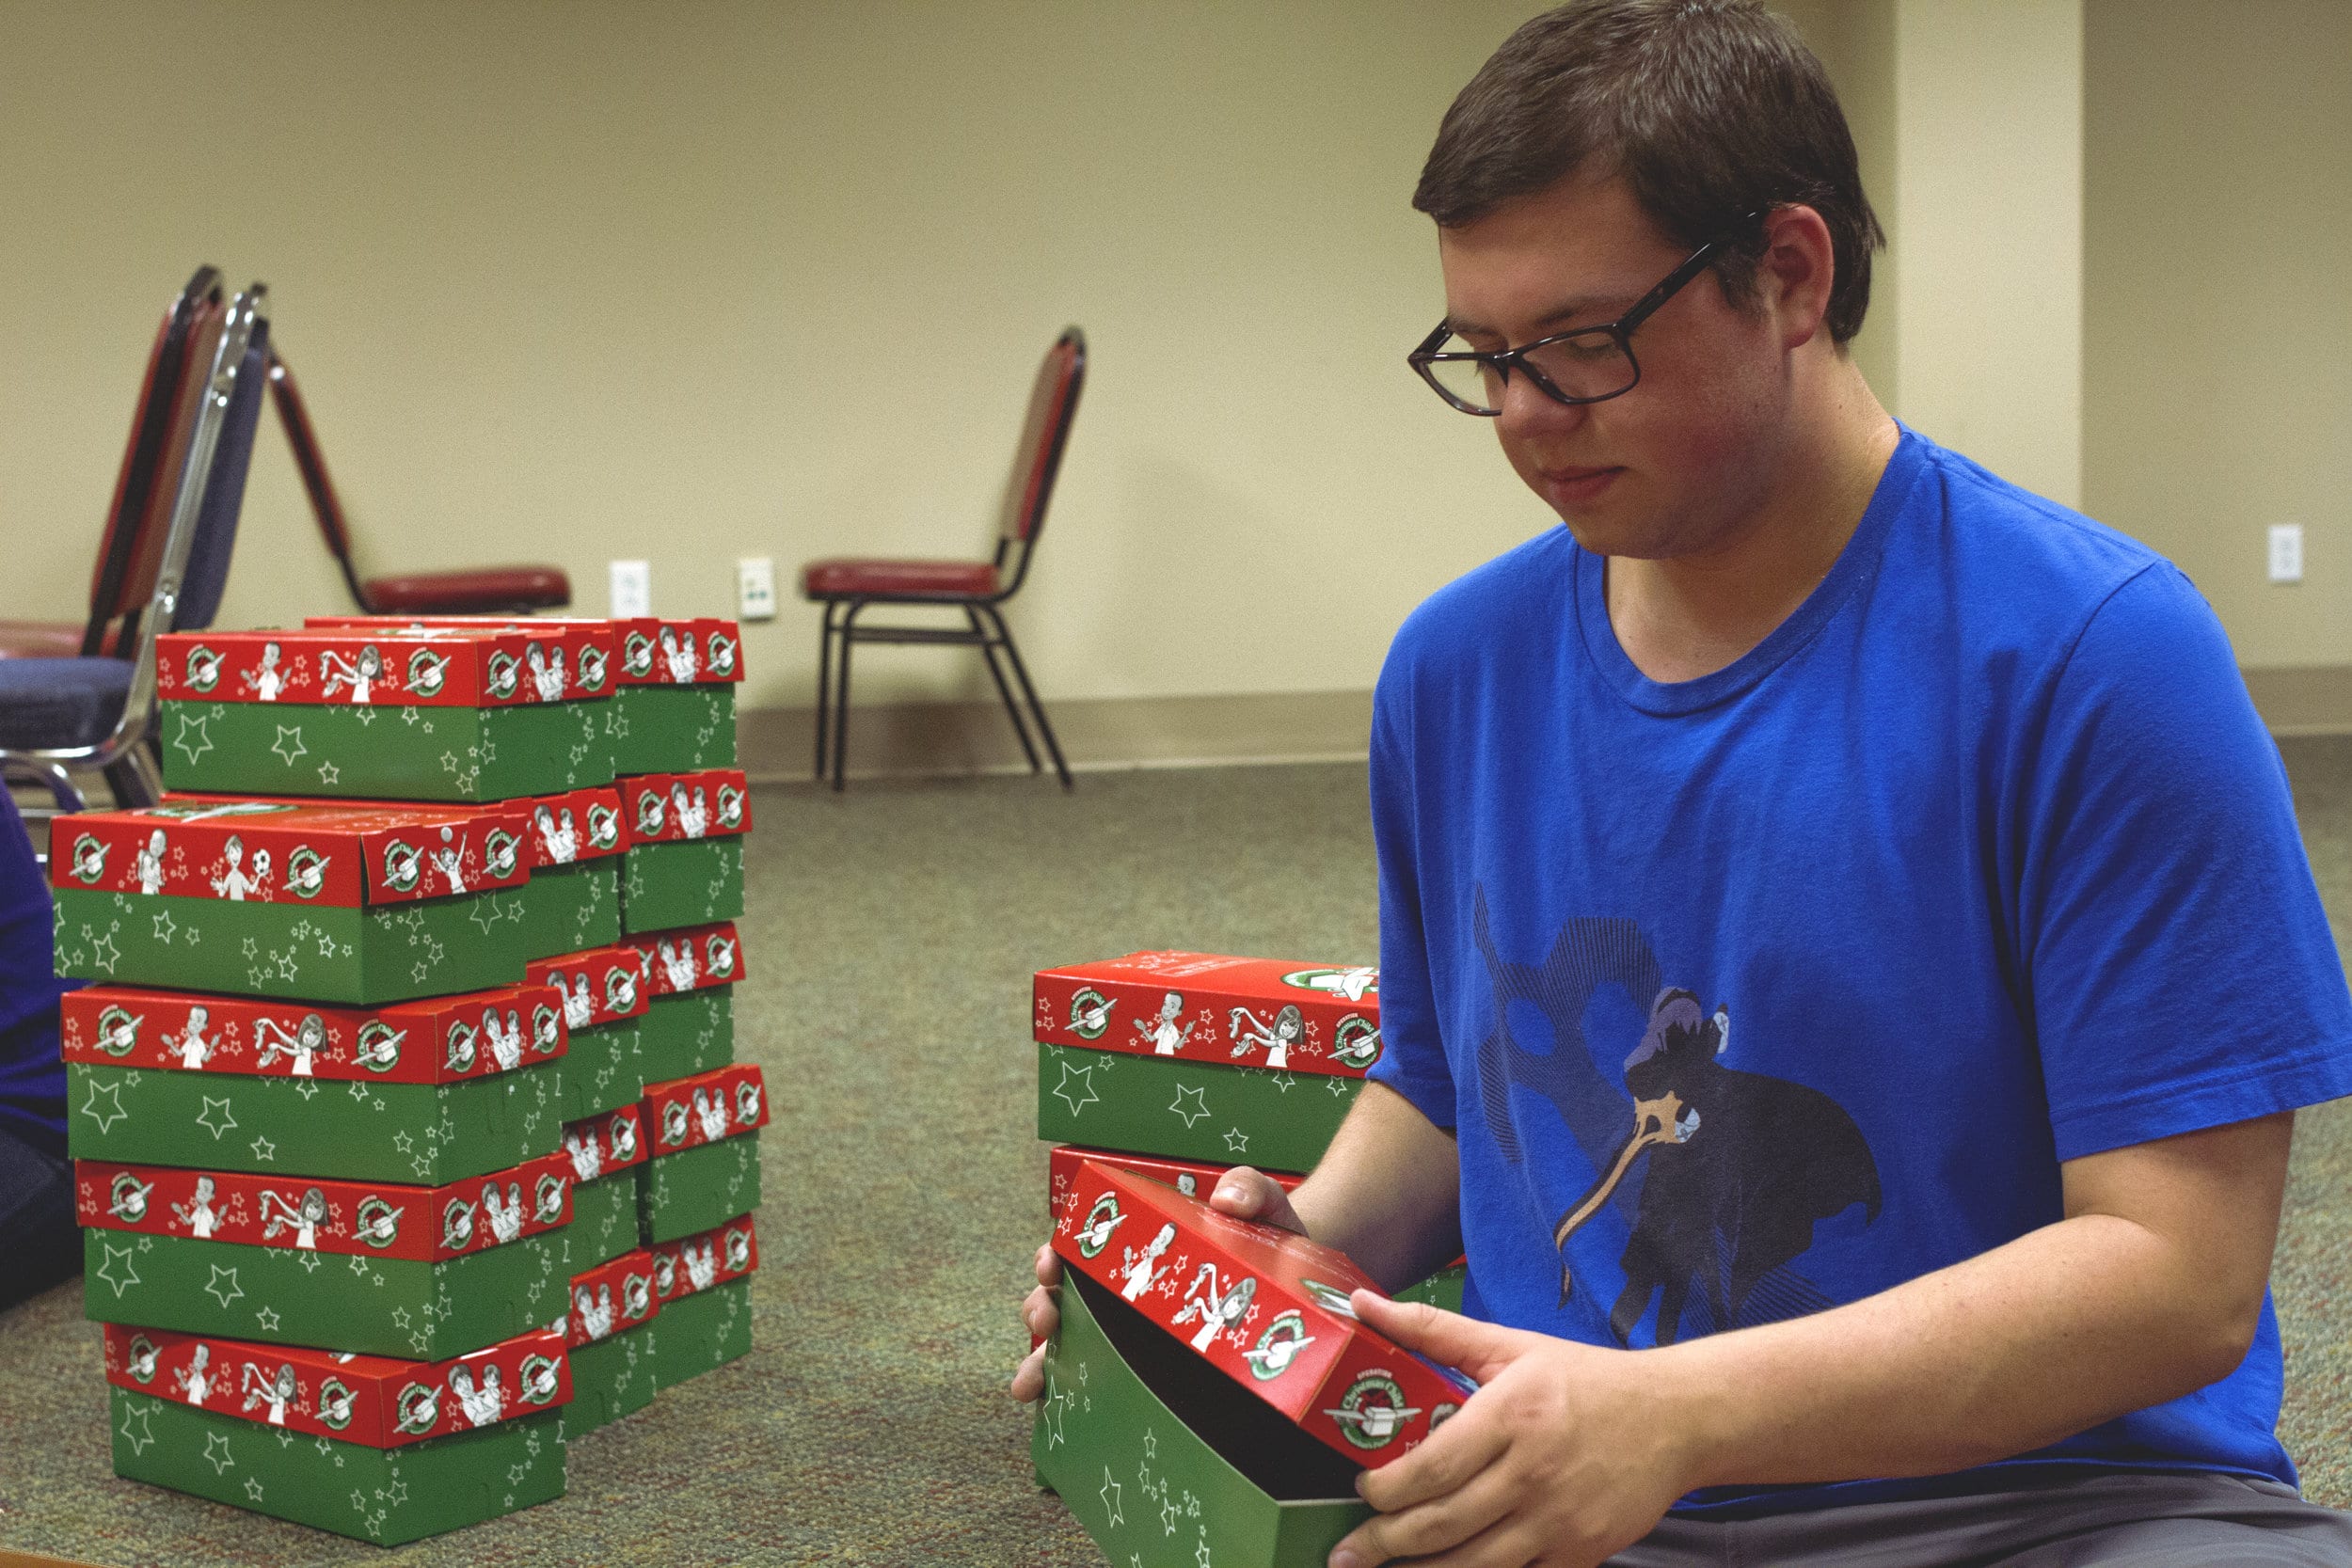  Justin Oates did not know anything about Operation Christmas Child until he came to NGU and the university had this event. His friends were involved in setting this up and he wanted to be a part of Operation Christmas Child's mission.&nbsp; 